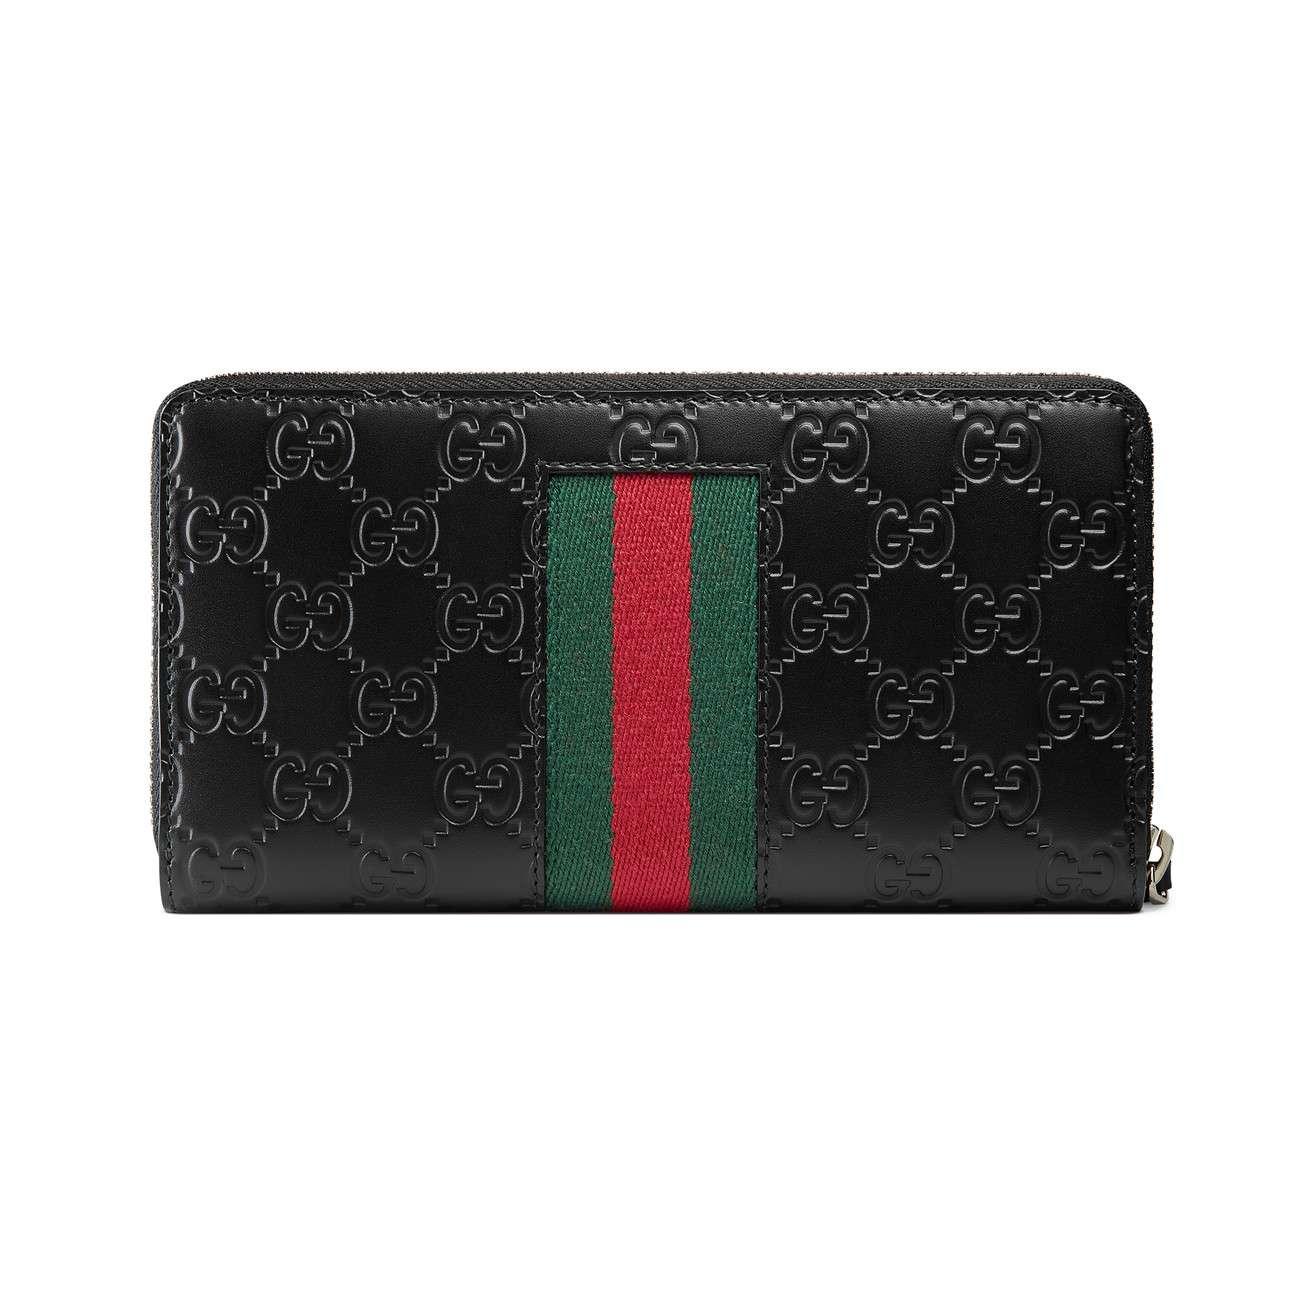 Gucci Leather Signature Web Zip Around Wallet in Black for Men - Lyst